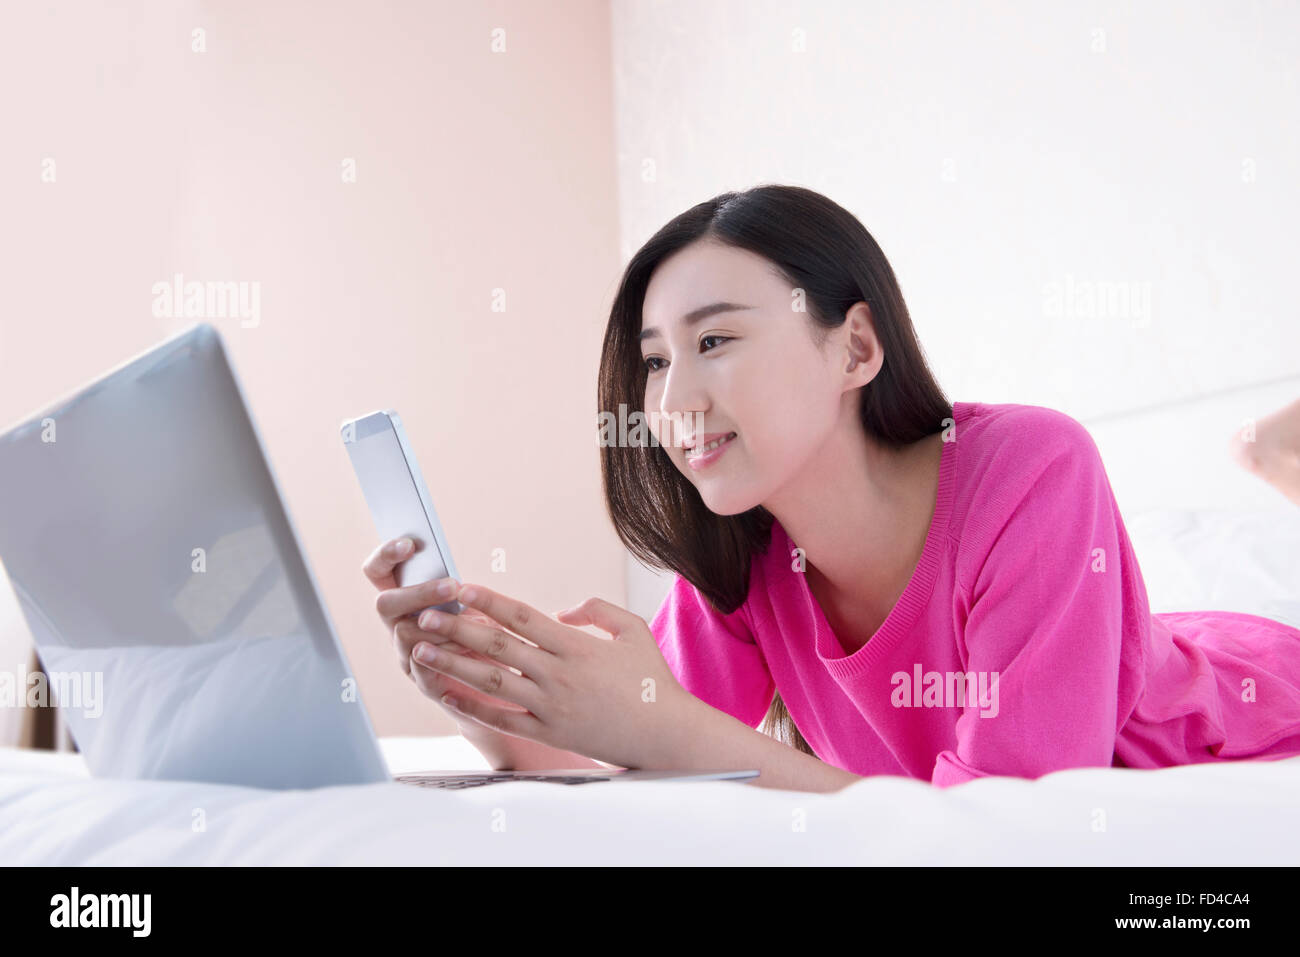 Womans Profile Smartphone Neckin Japanese Says Stock Vector